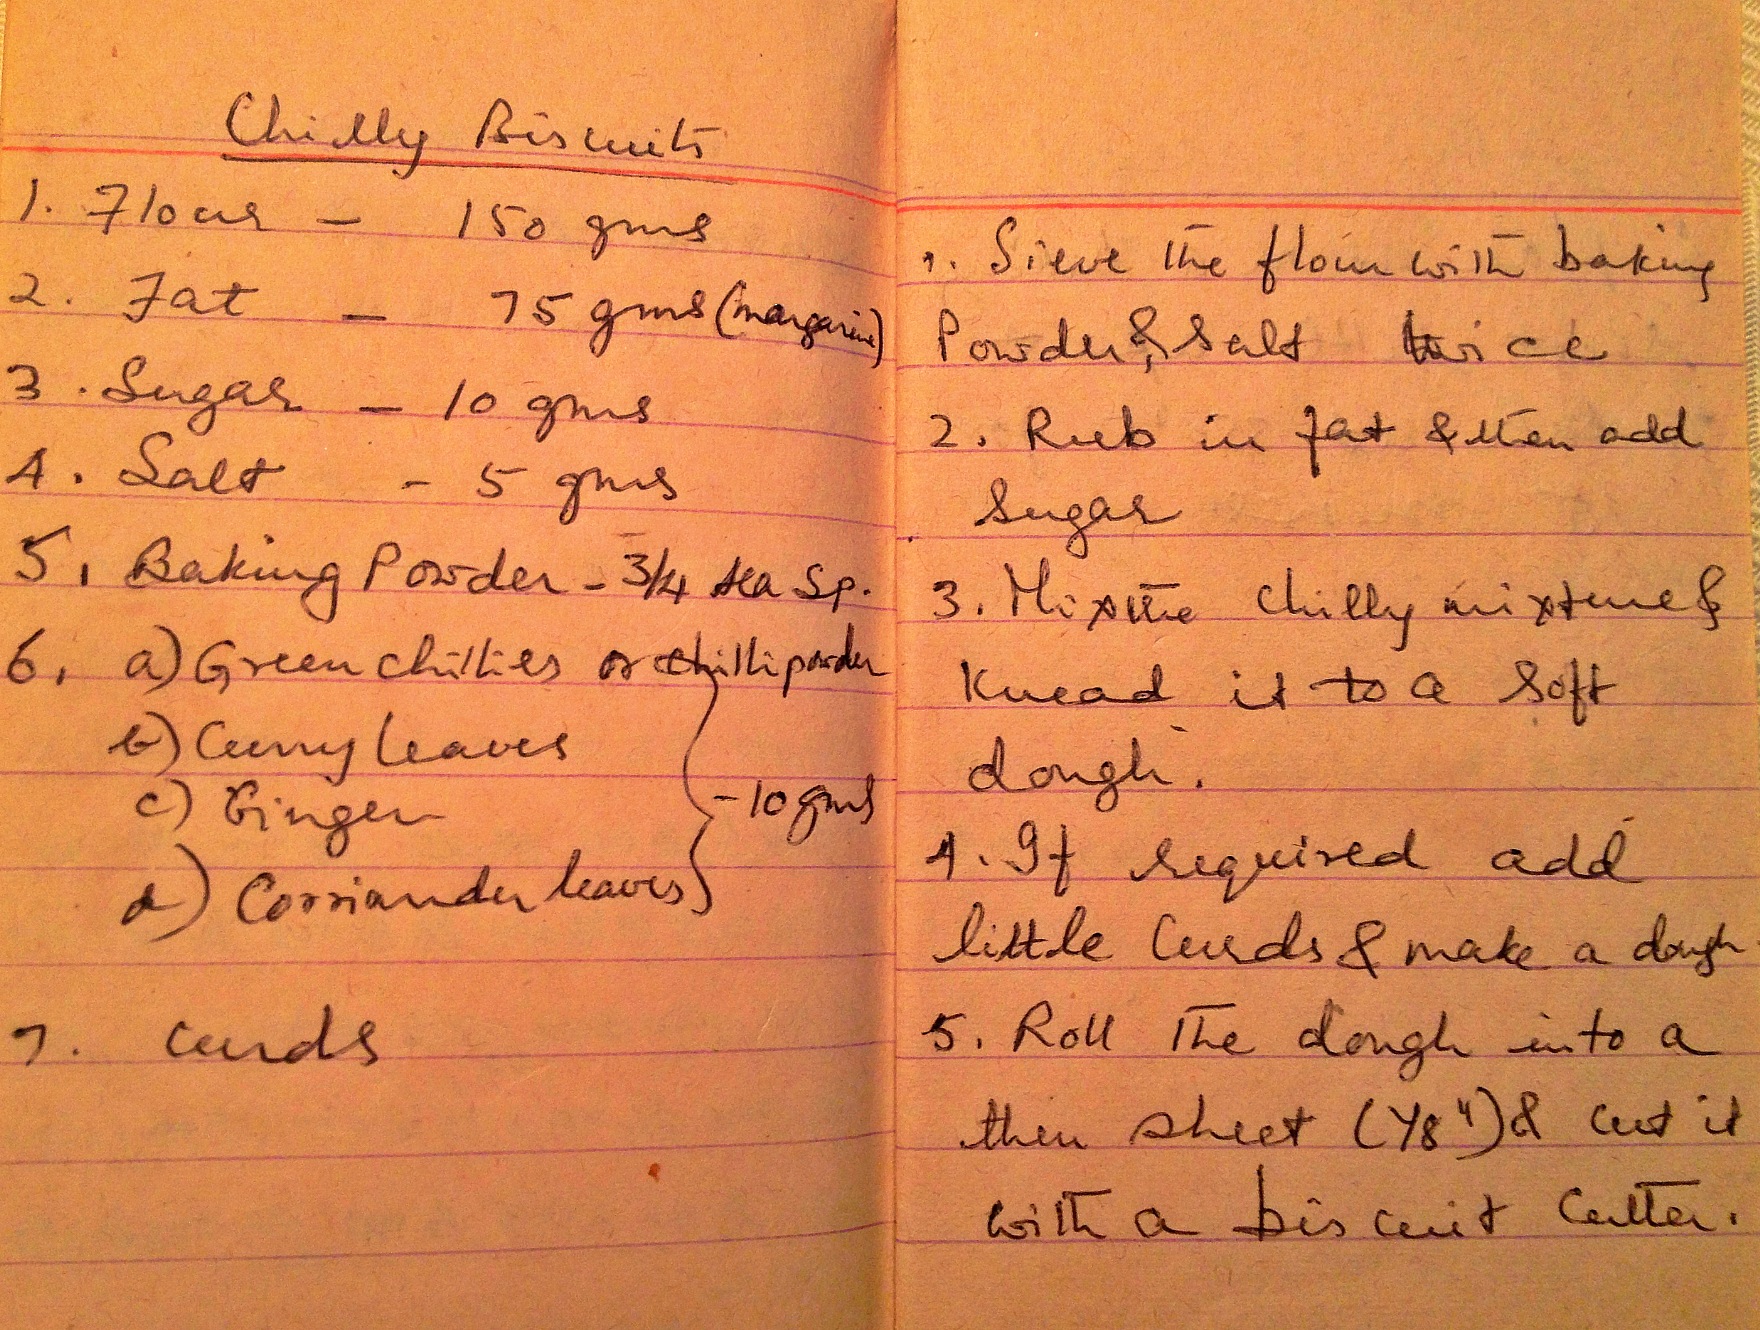 My mom's homemade recipes in small ruled notebook